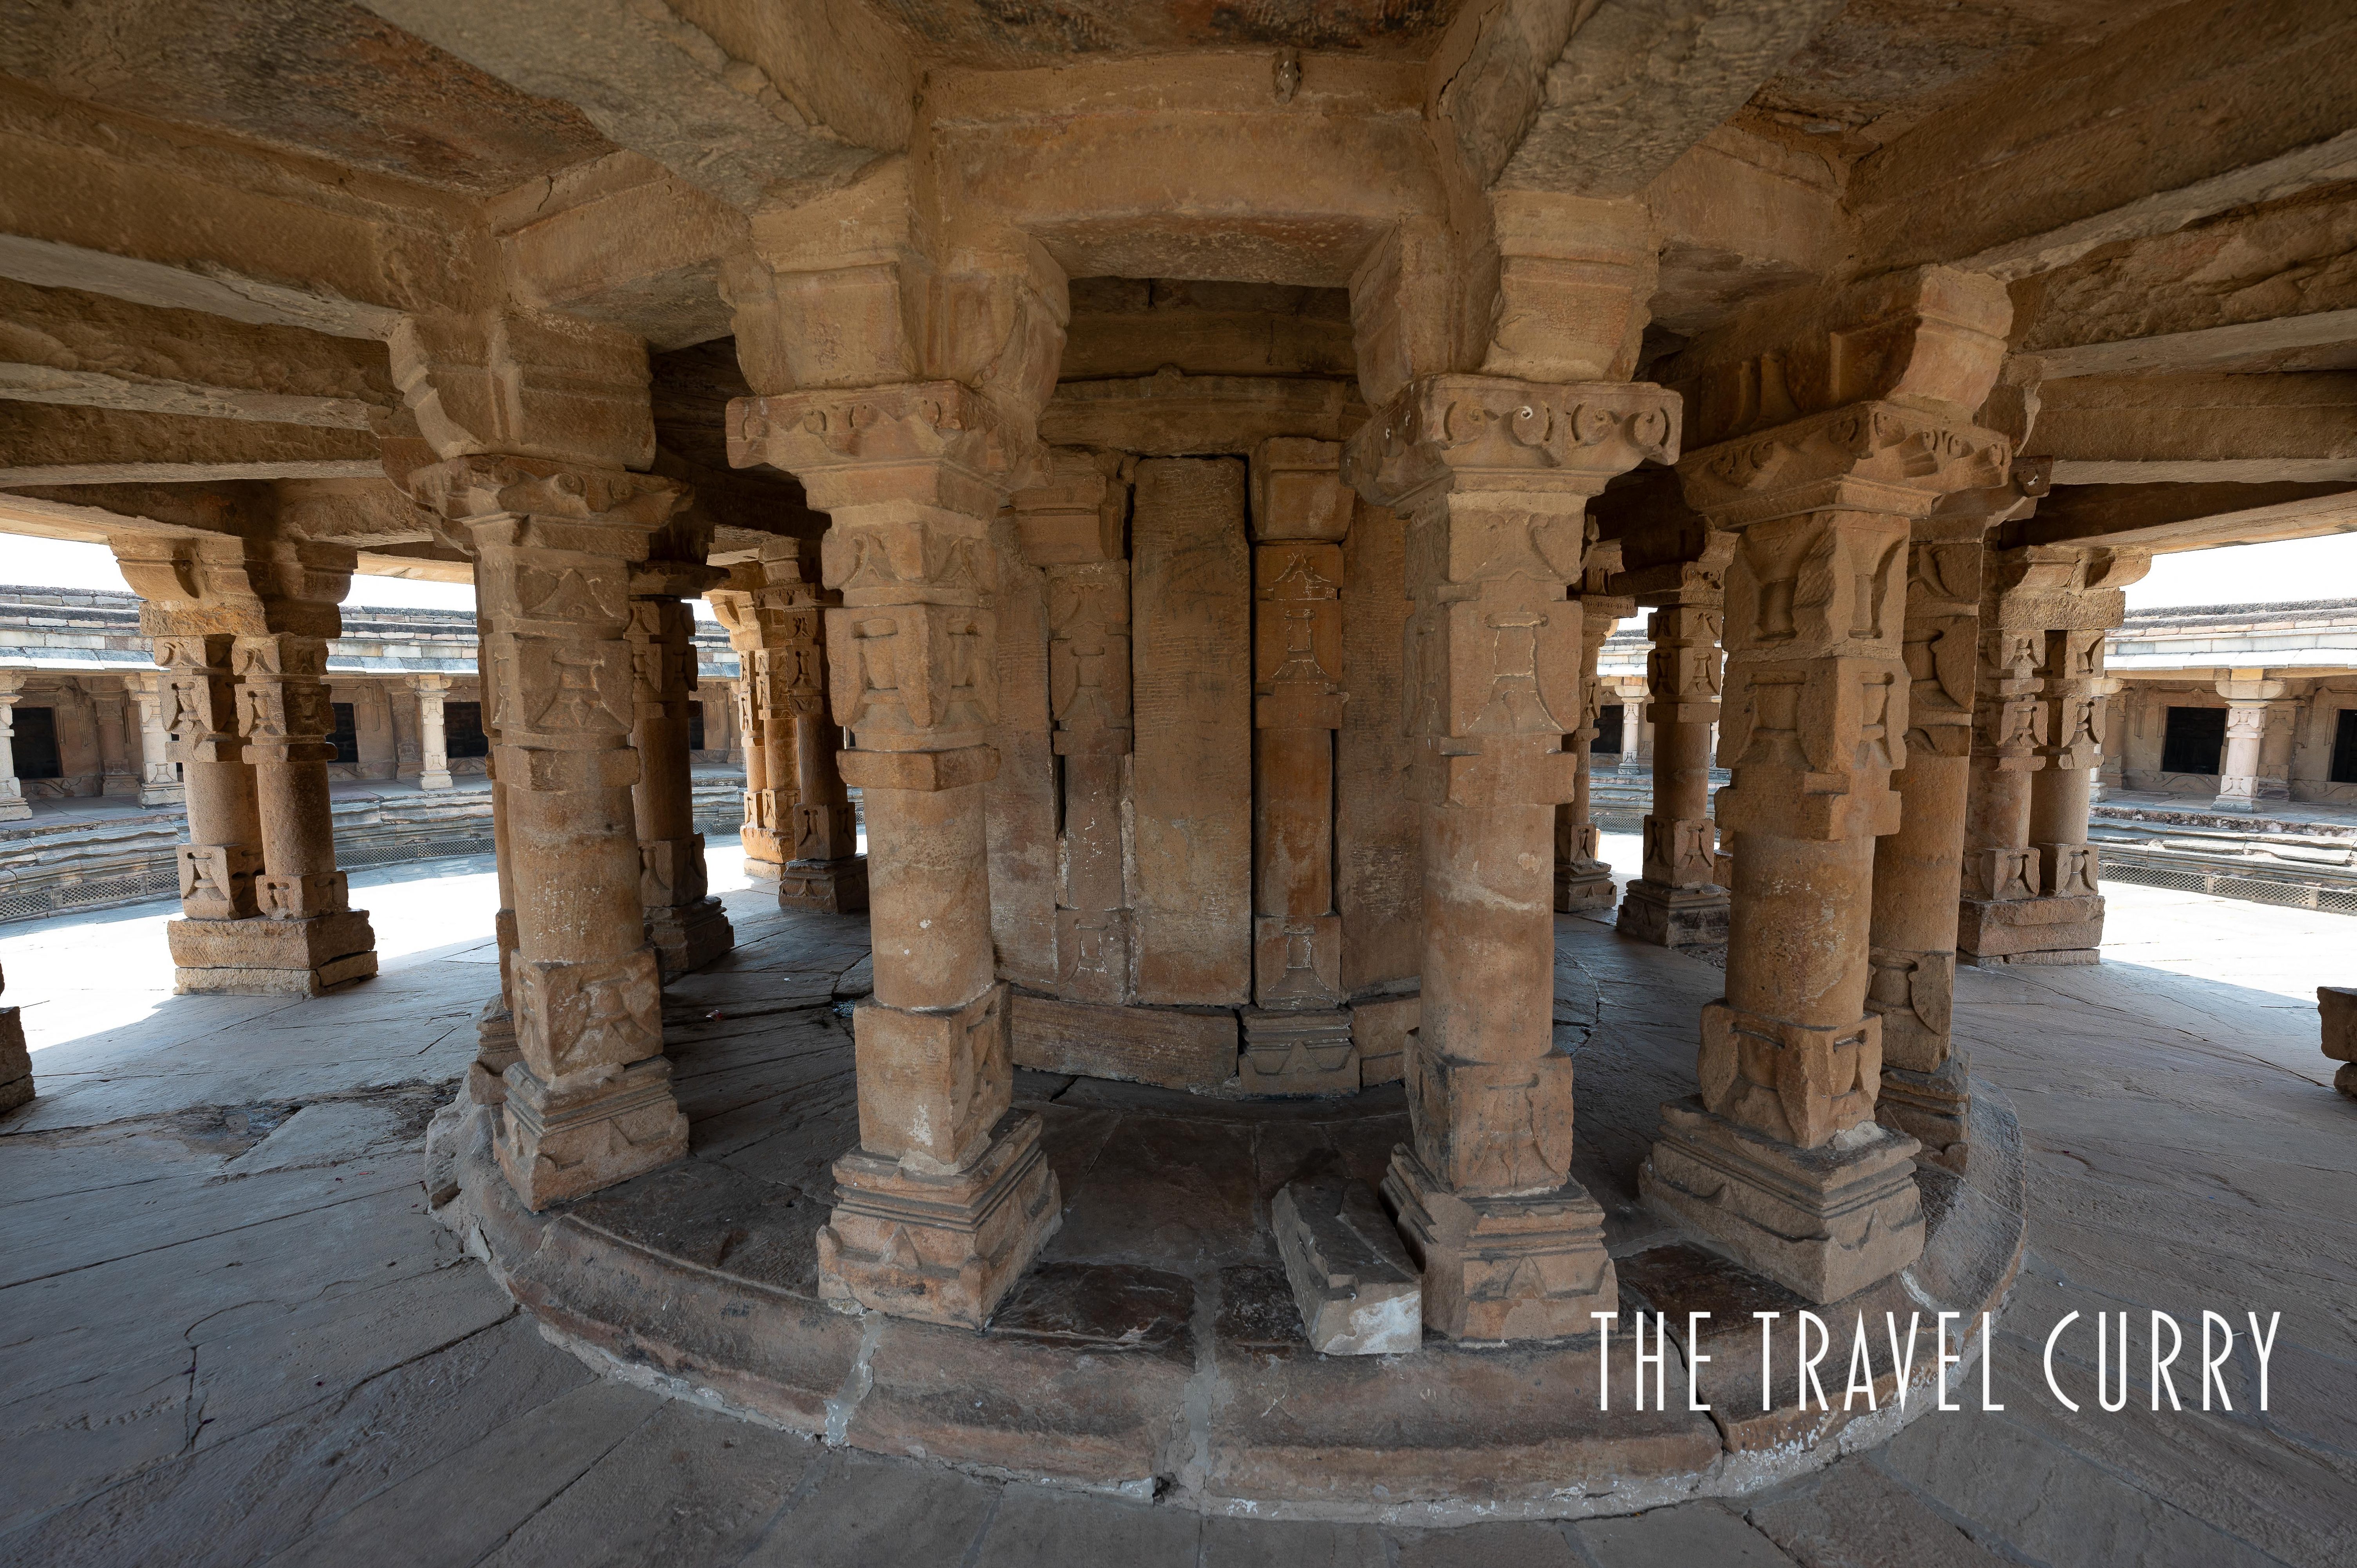 The central chamber with Shiva Linga in Chausath Yogini Temple